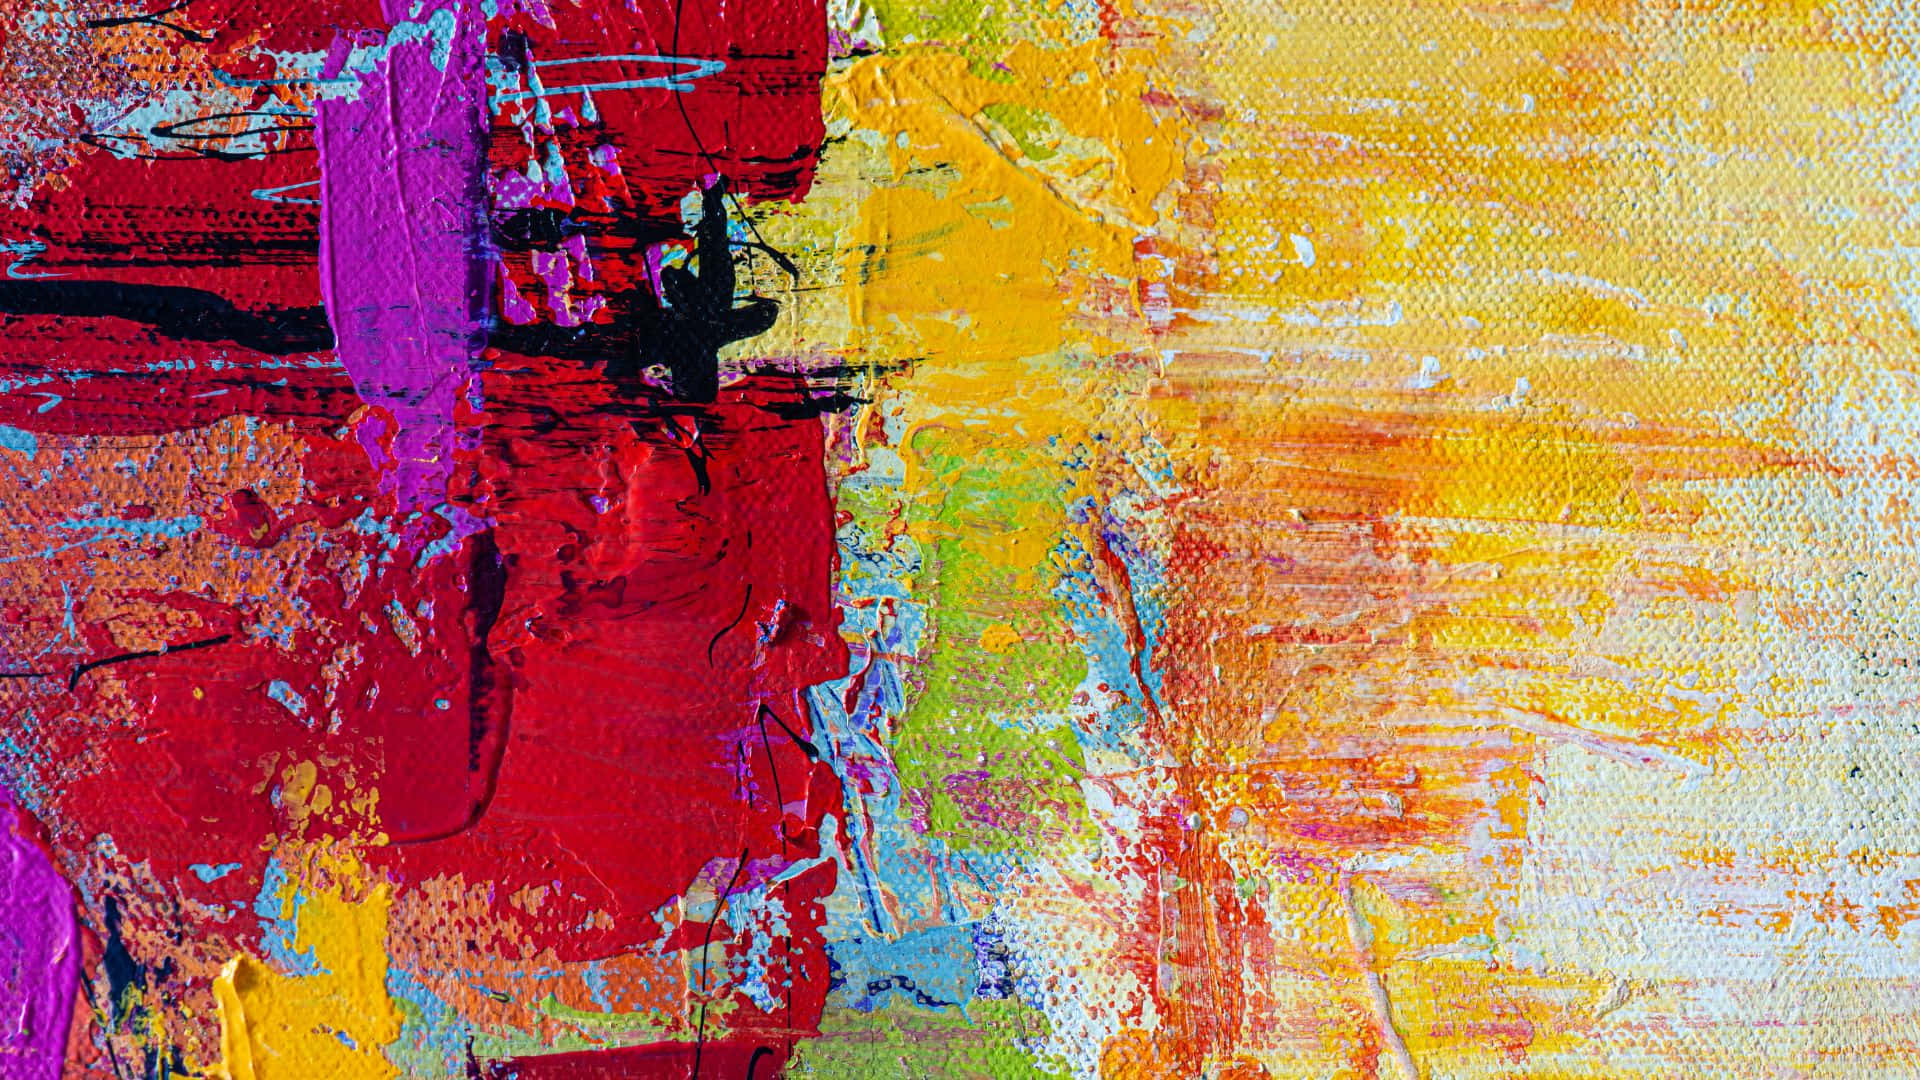 Colorful abstract expressionist painting